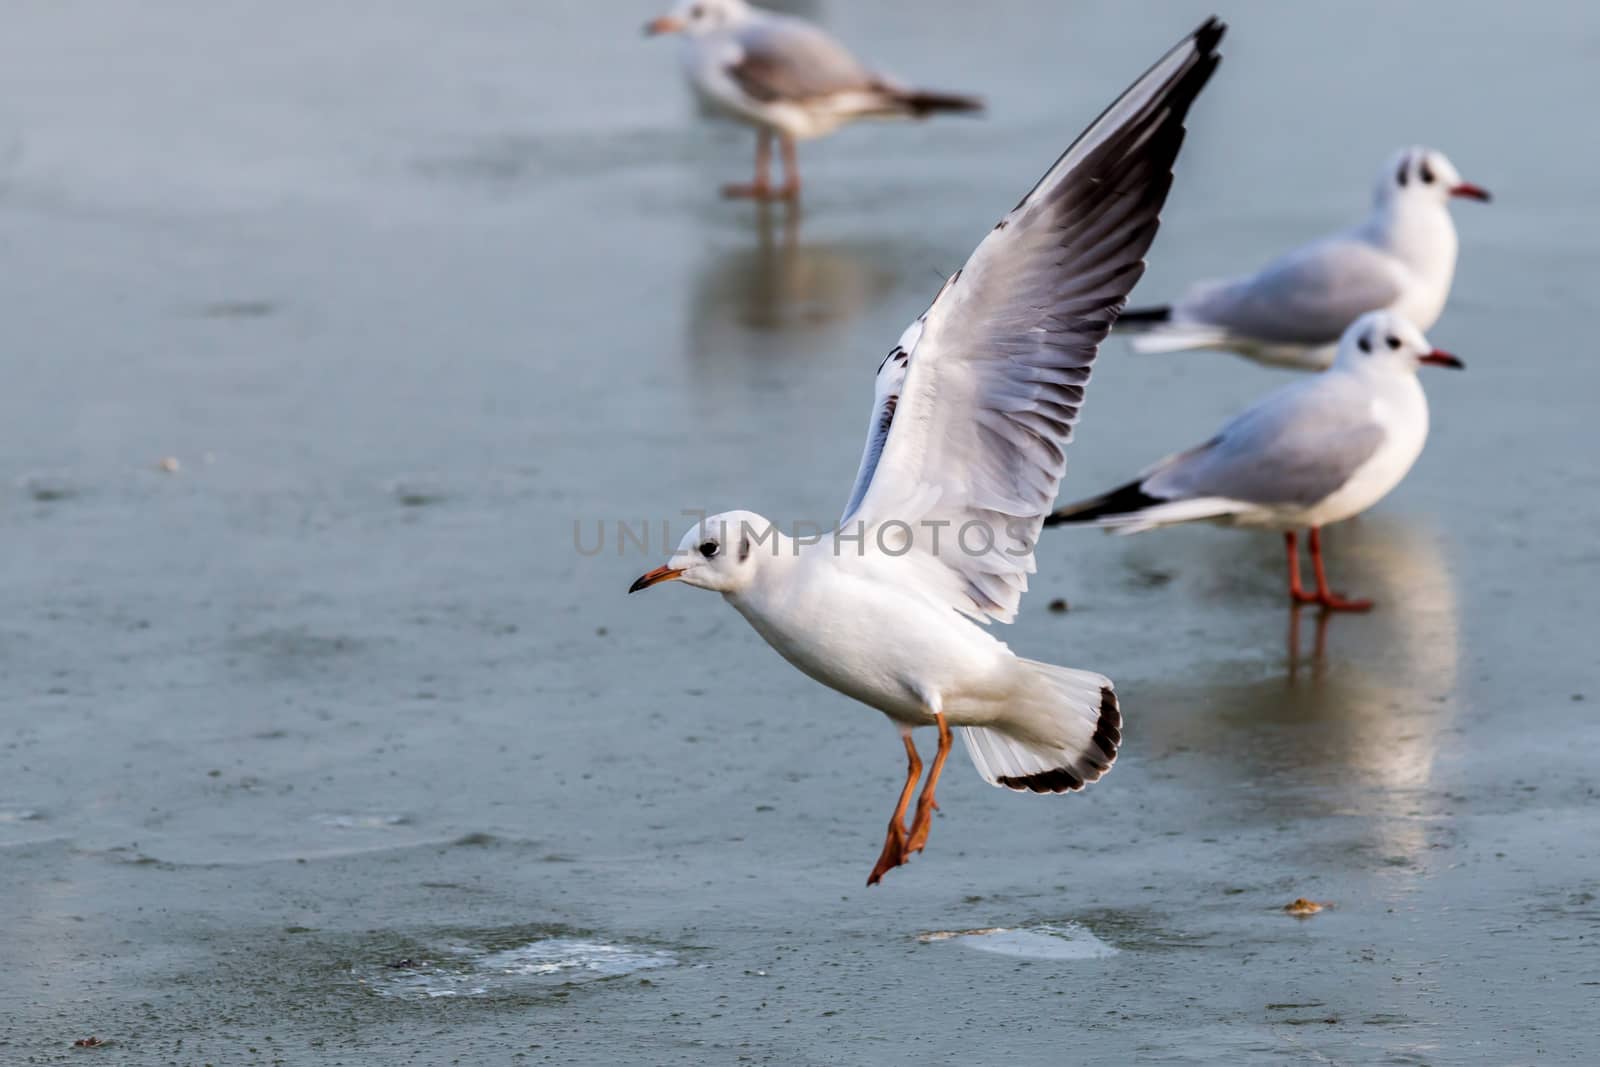 Seagulls on the ice in winter